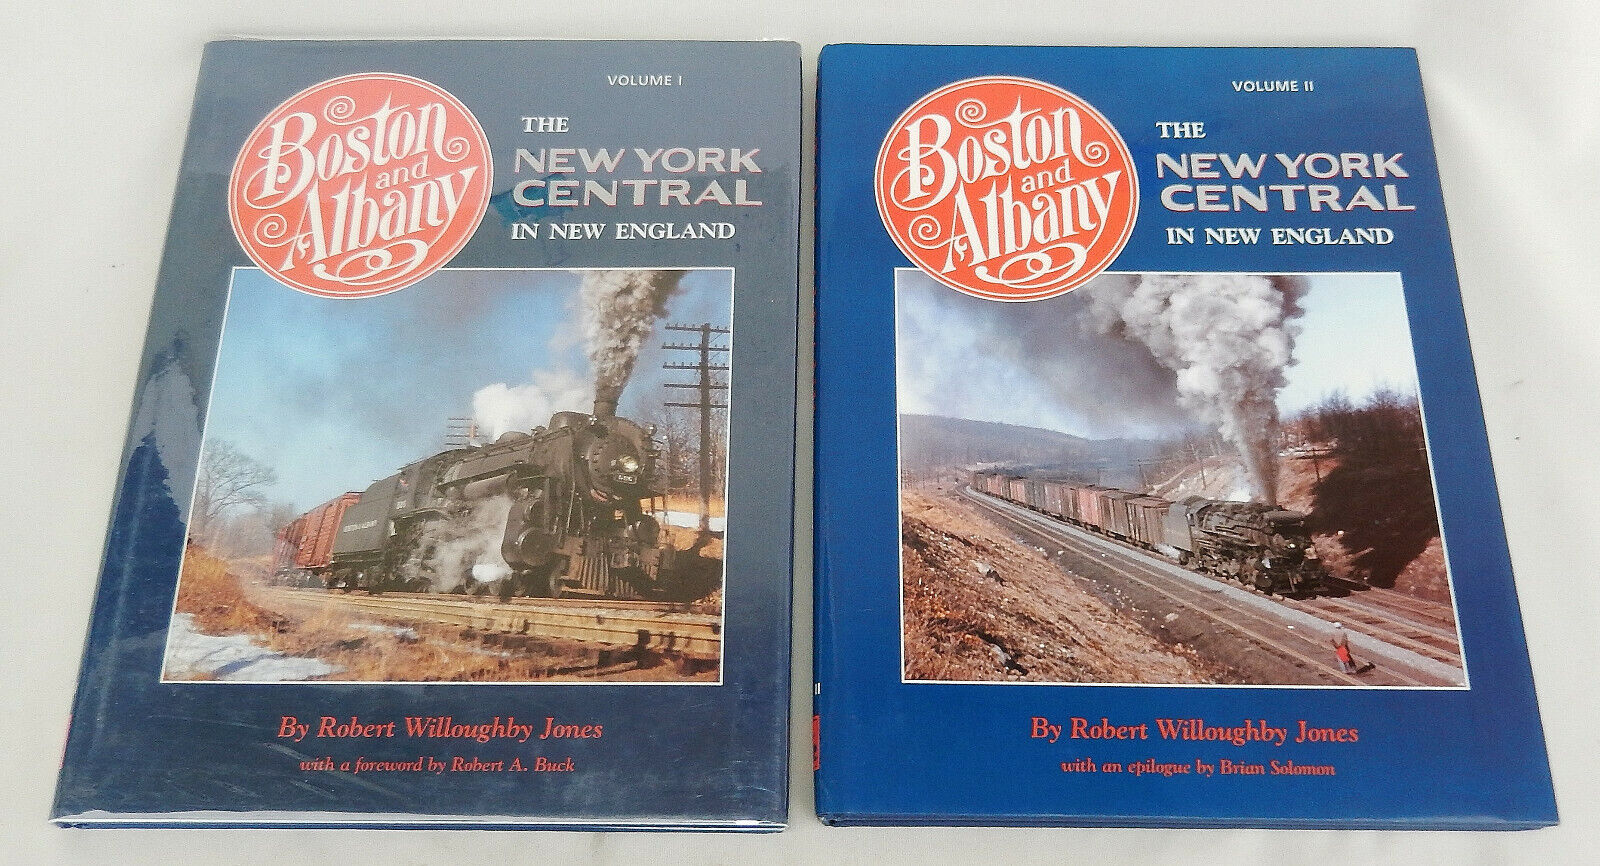 Boston and Albany:The New York Central in New England Vol. 1 & Vol. 2 